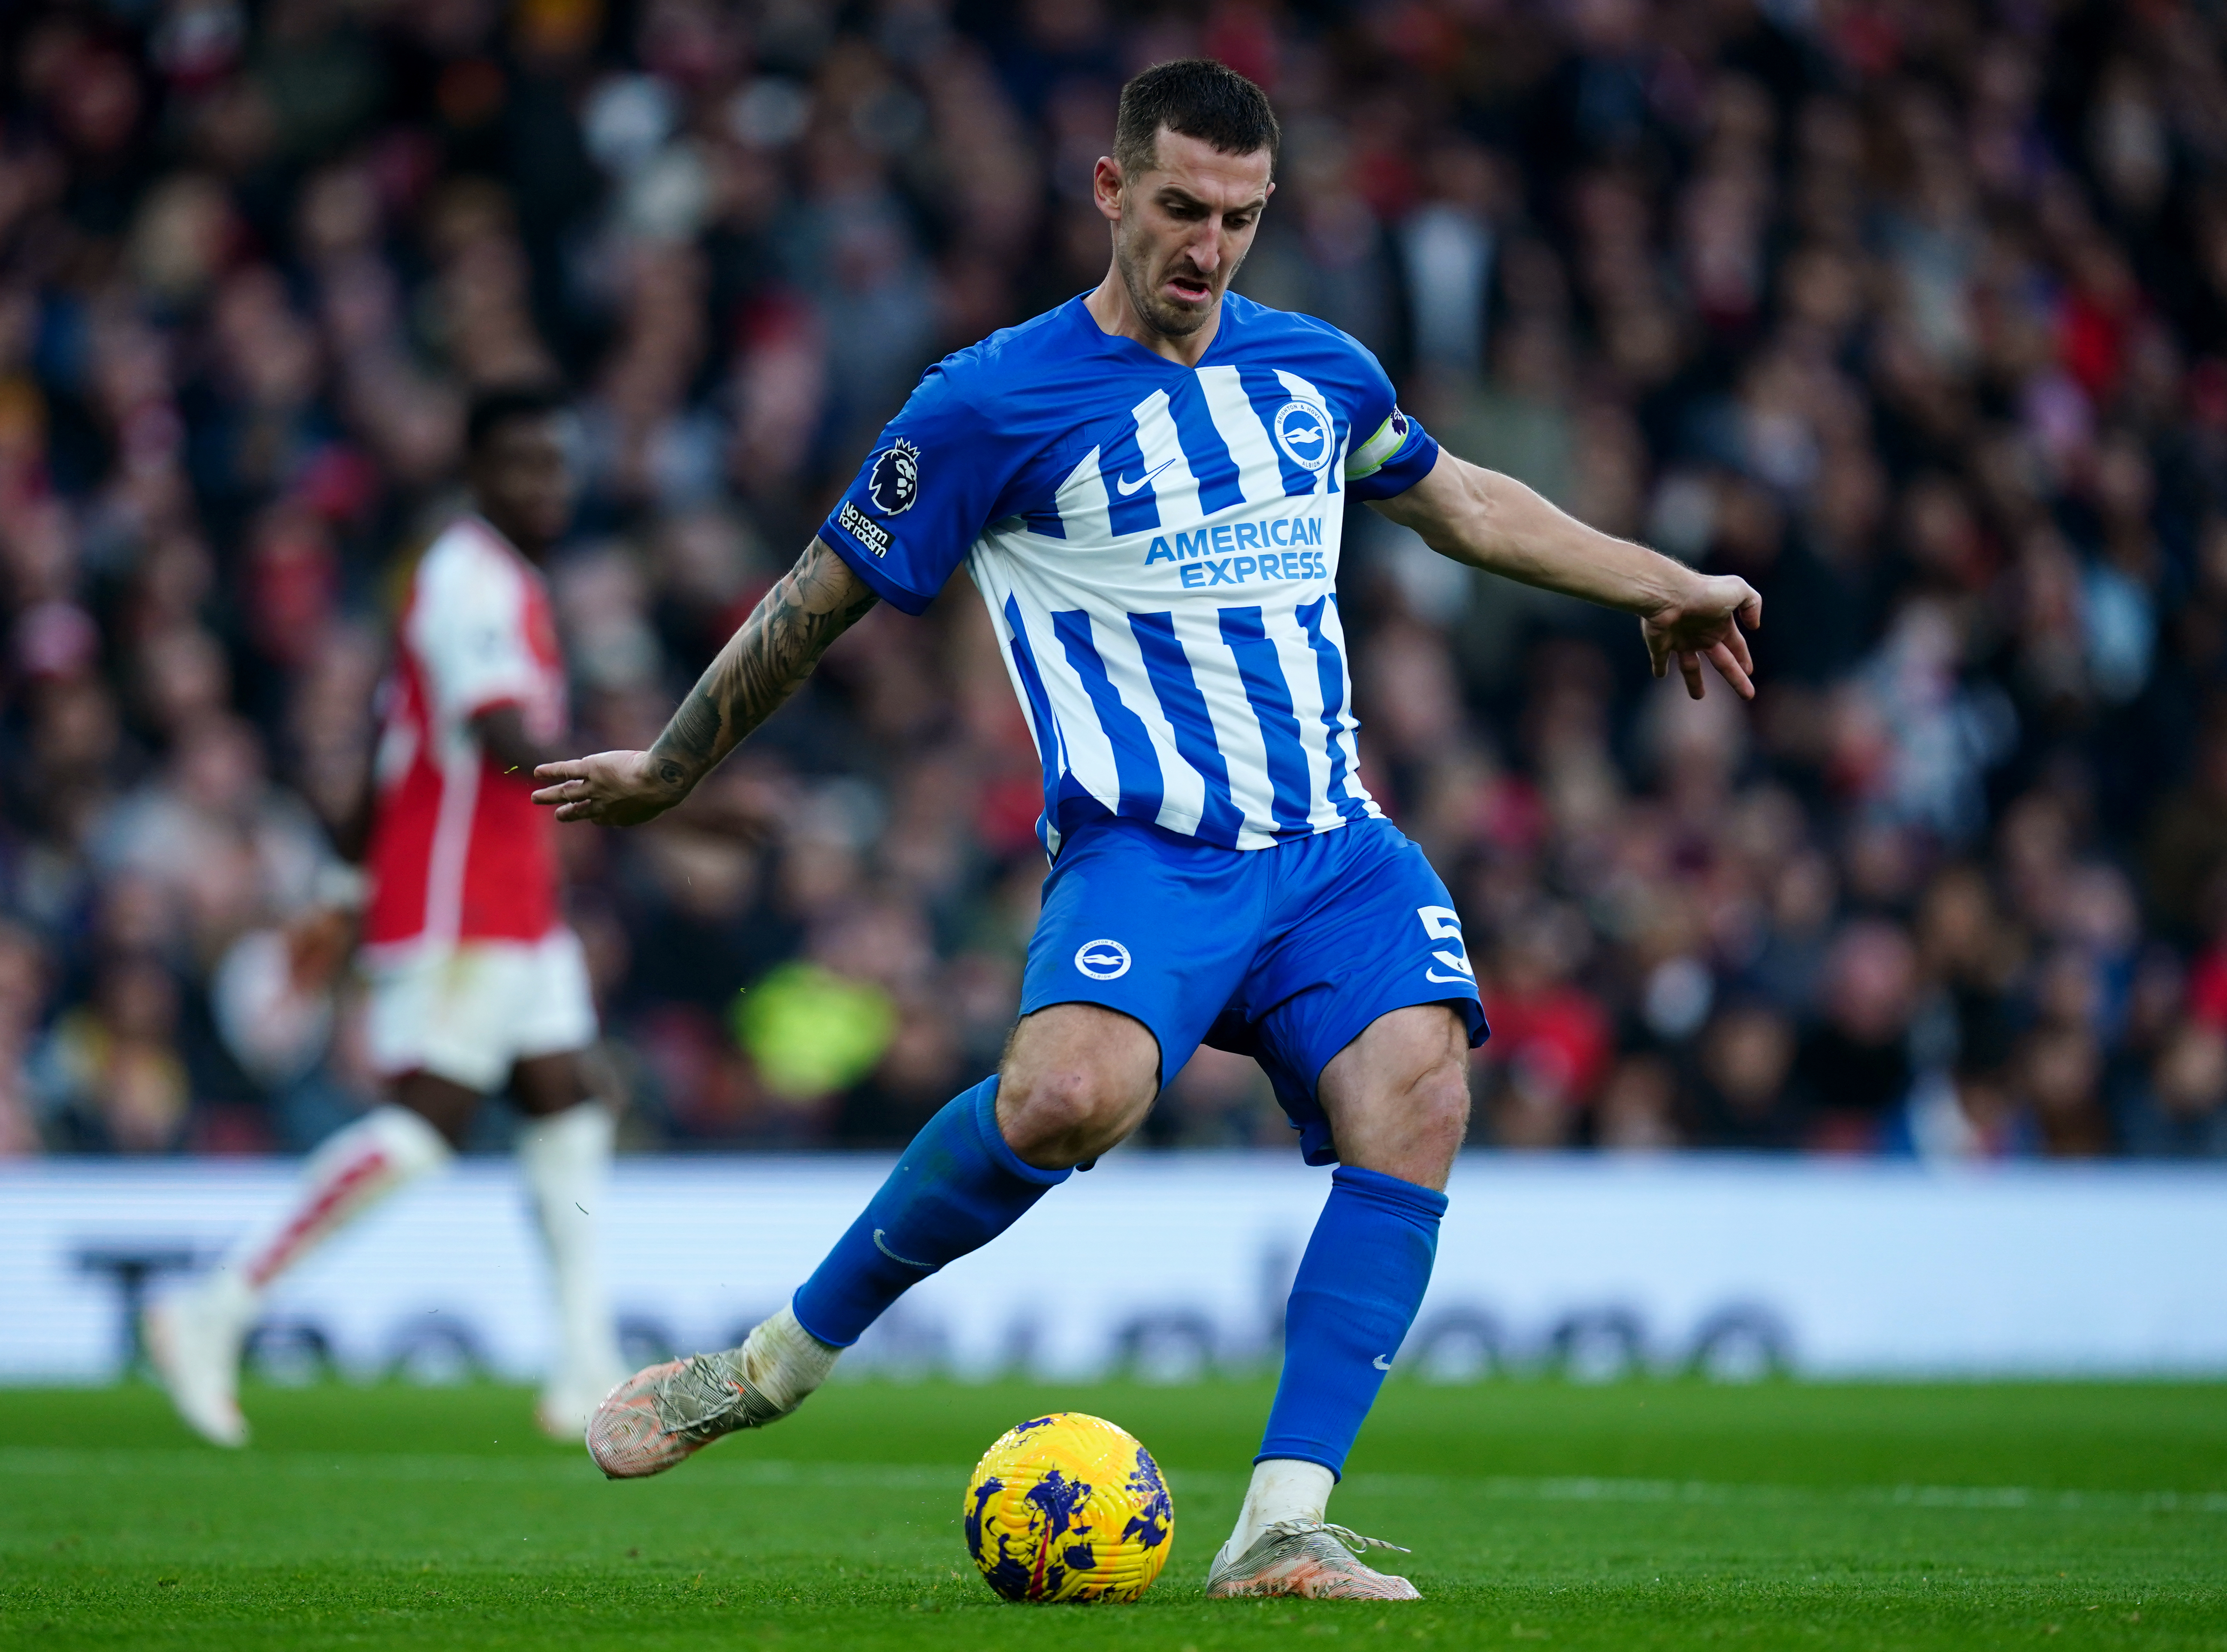 Brighton captain Lewis Dunk wants to move on quickly from defeat at Arsenal